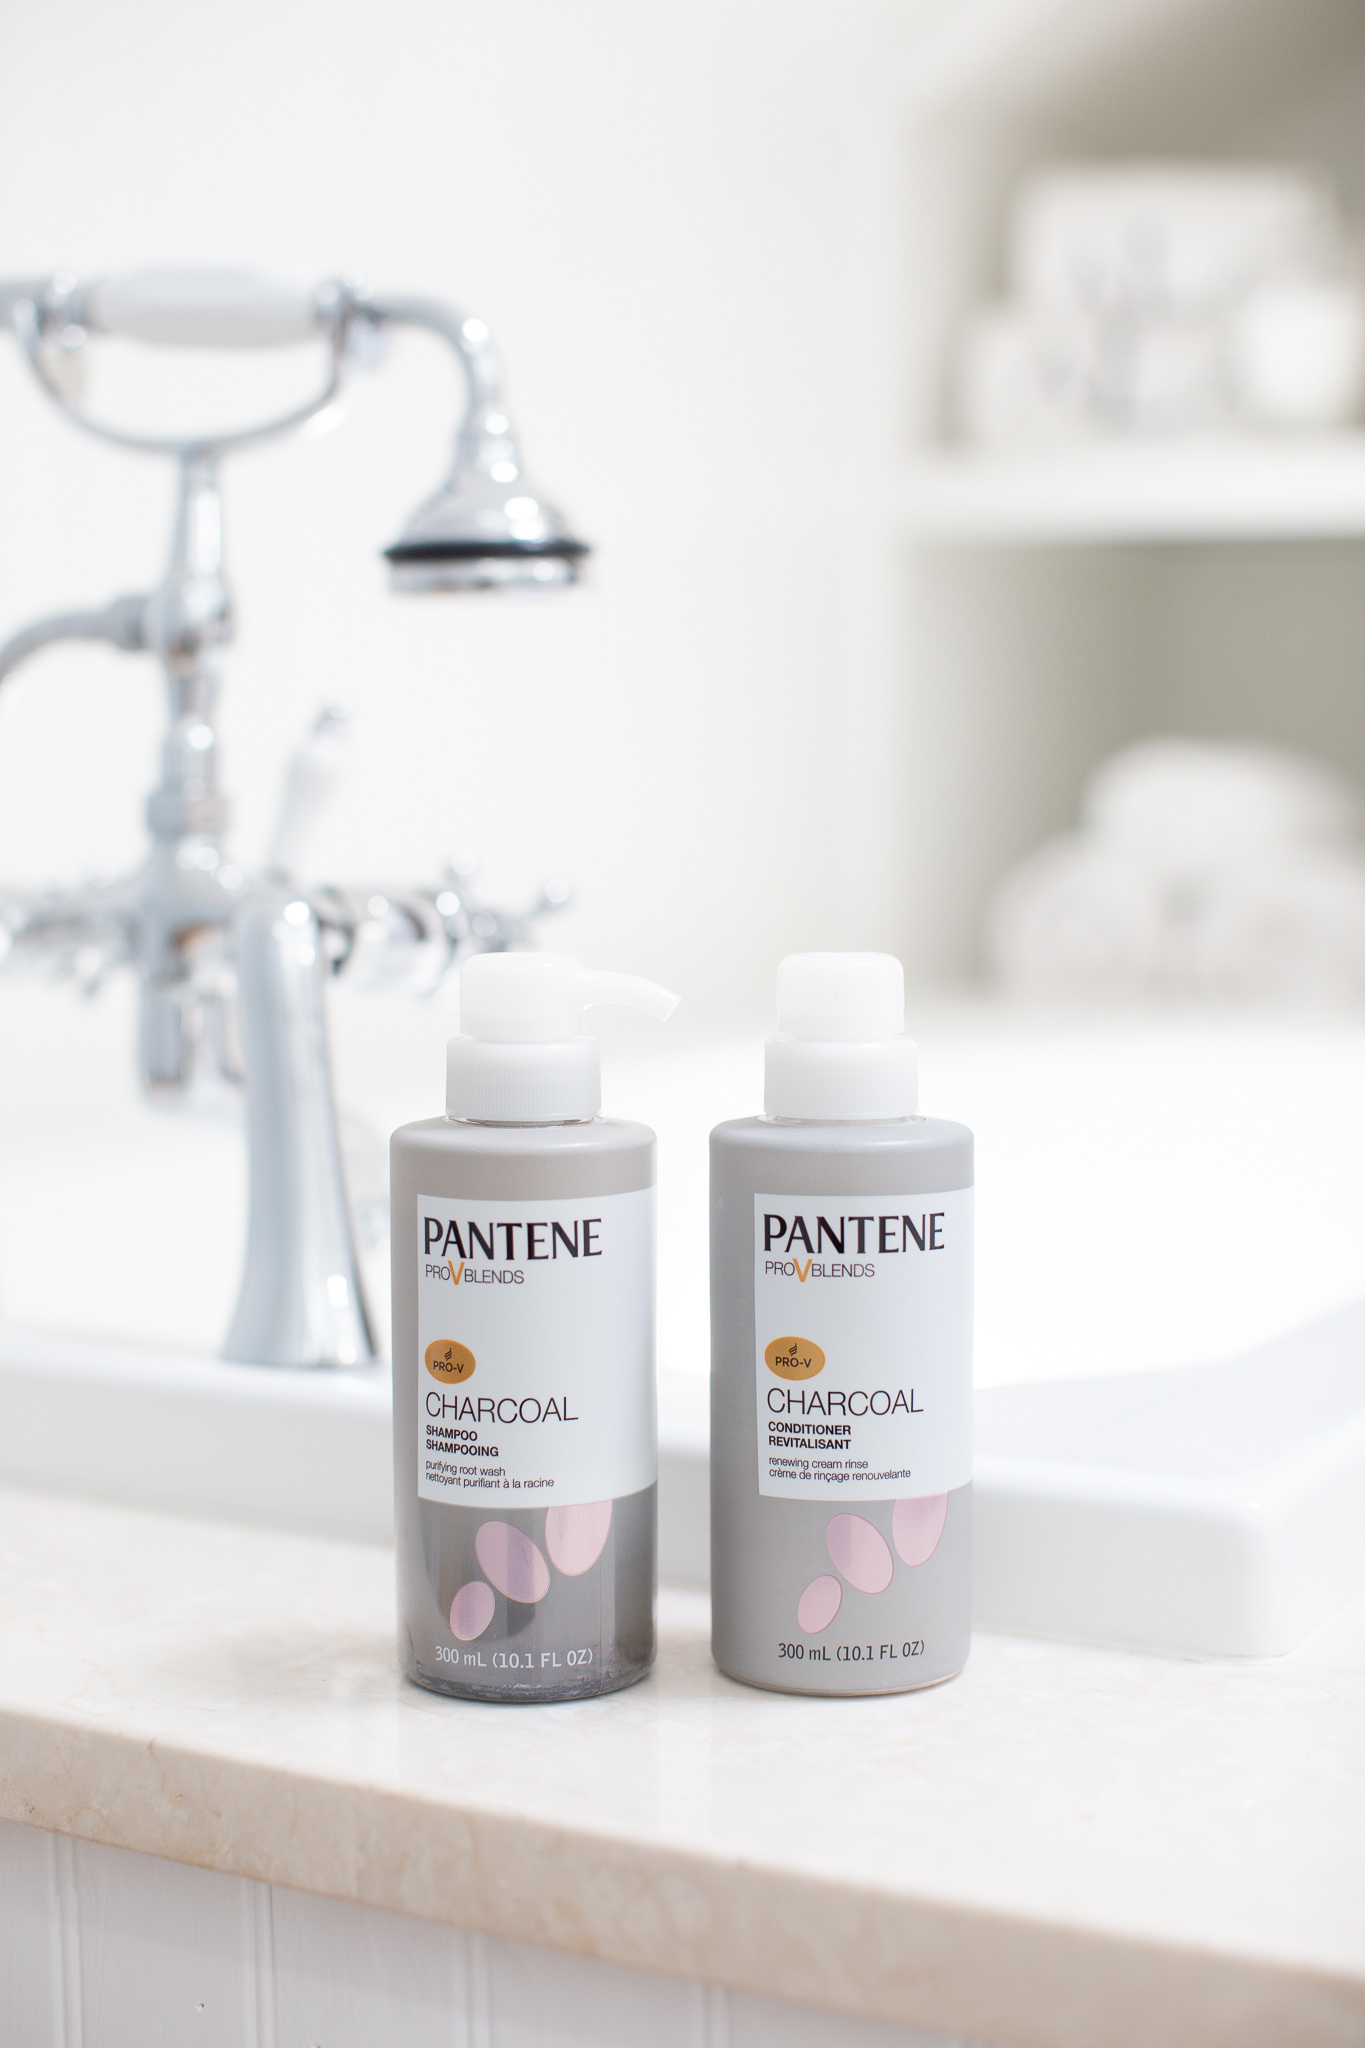 Pantene Charcoal Collection and its Magnetic Superpowers: Why it's a Game Changer featured by popular North Carolina lifestyle blogger Coffee Beans and Bobby Pins